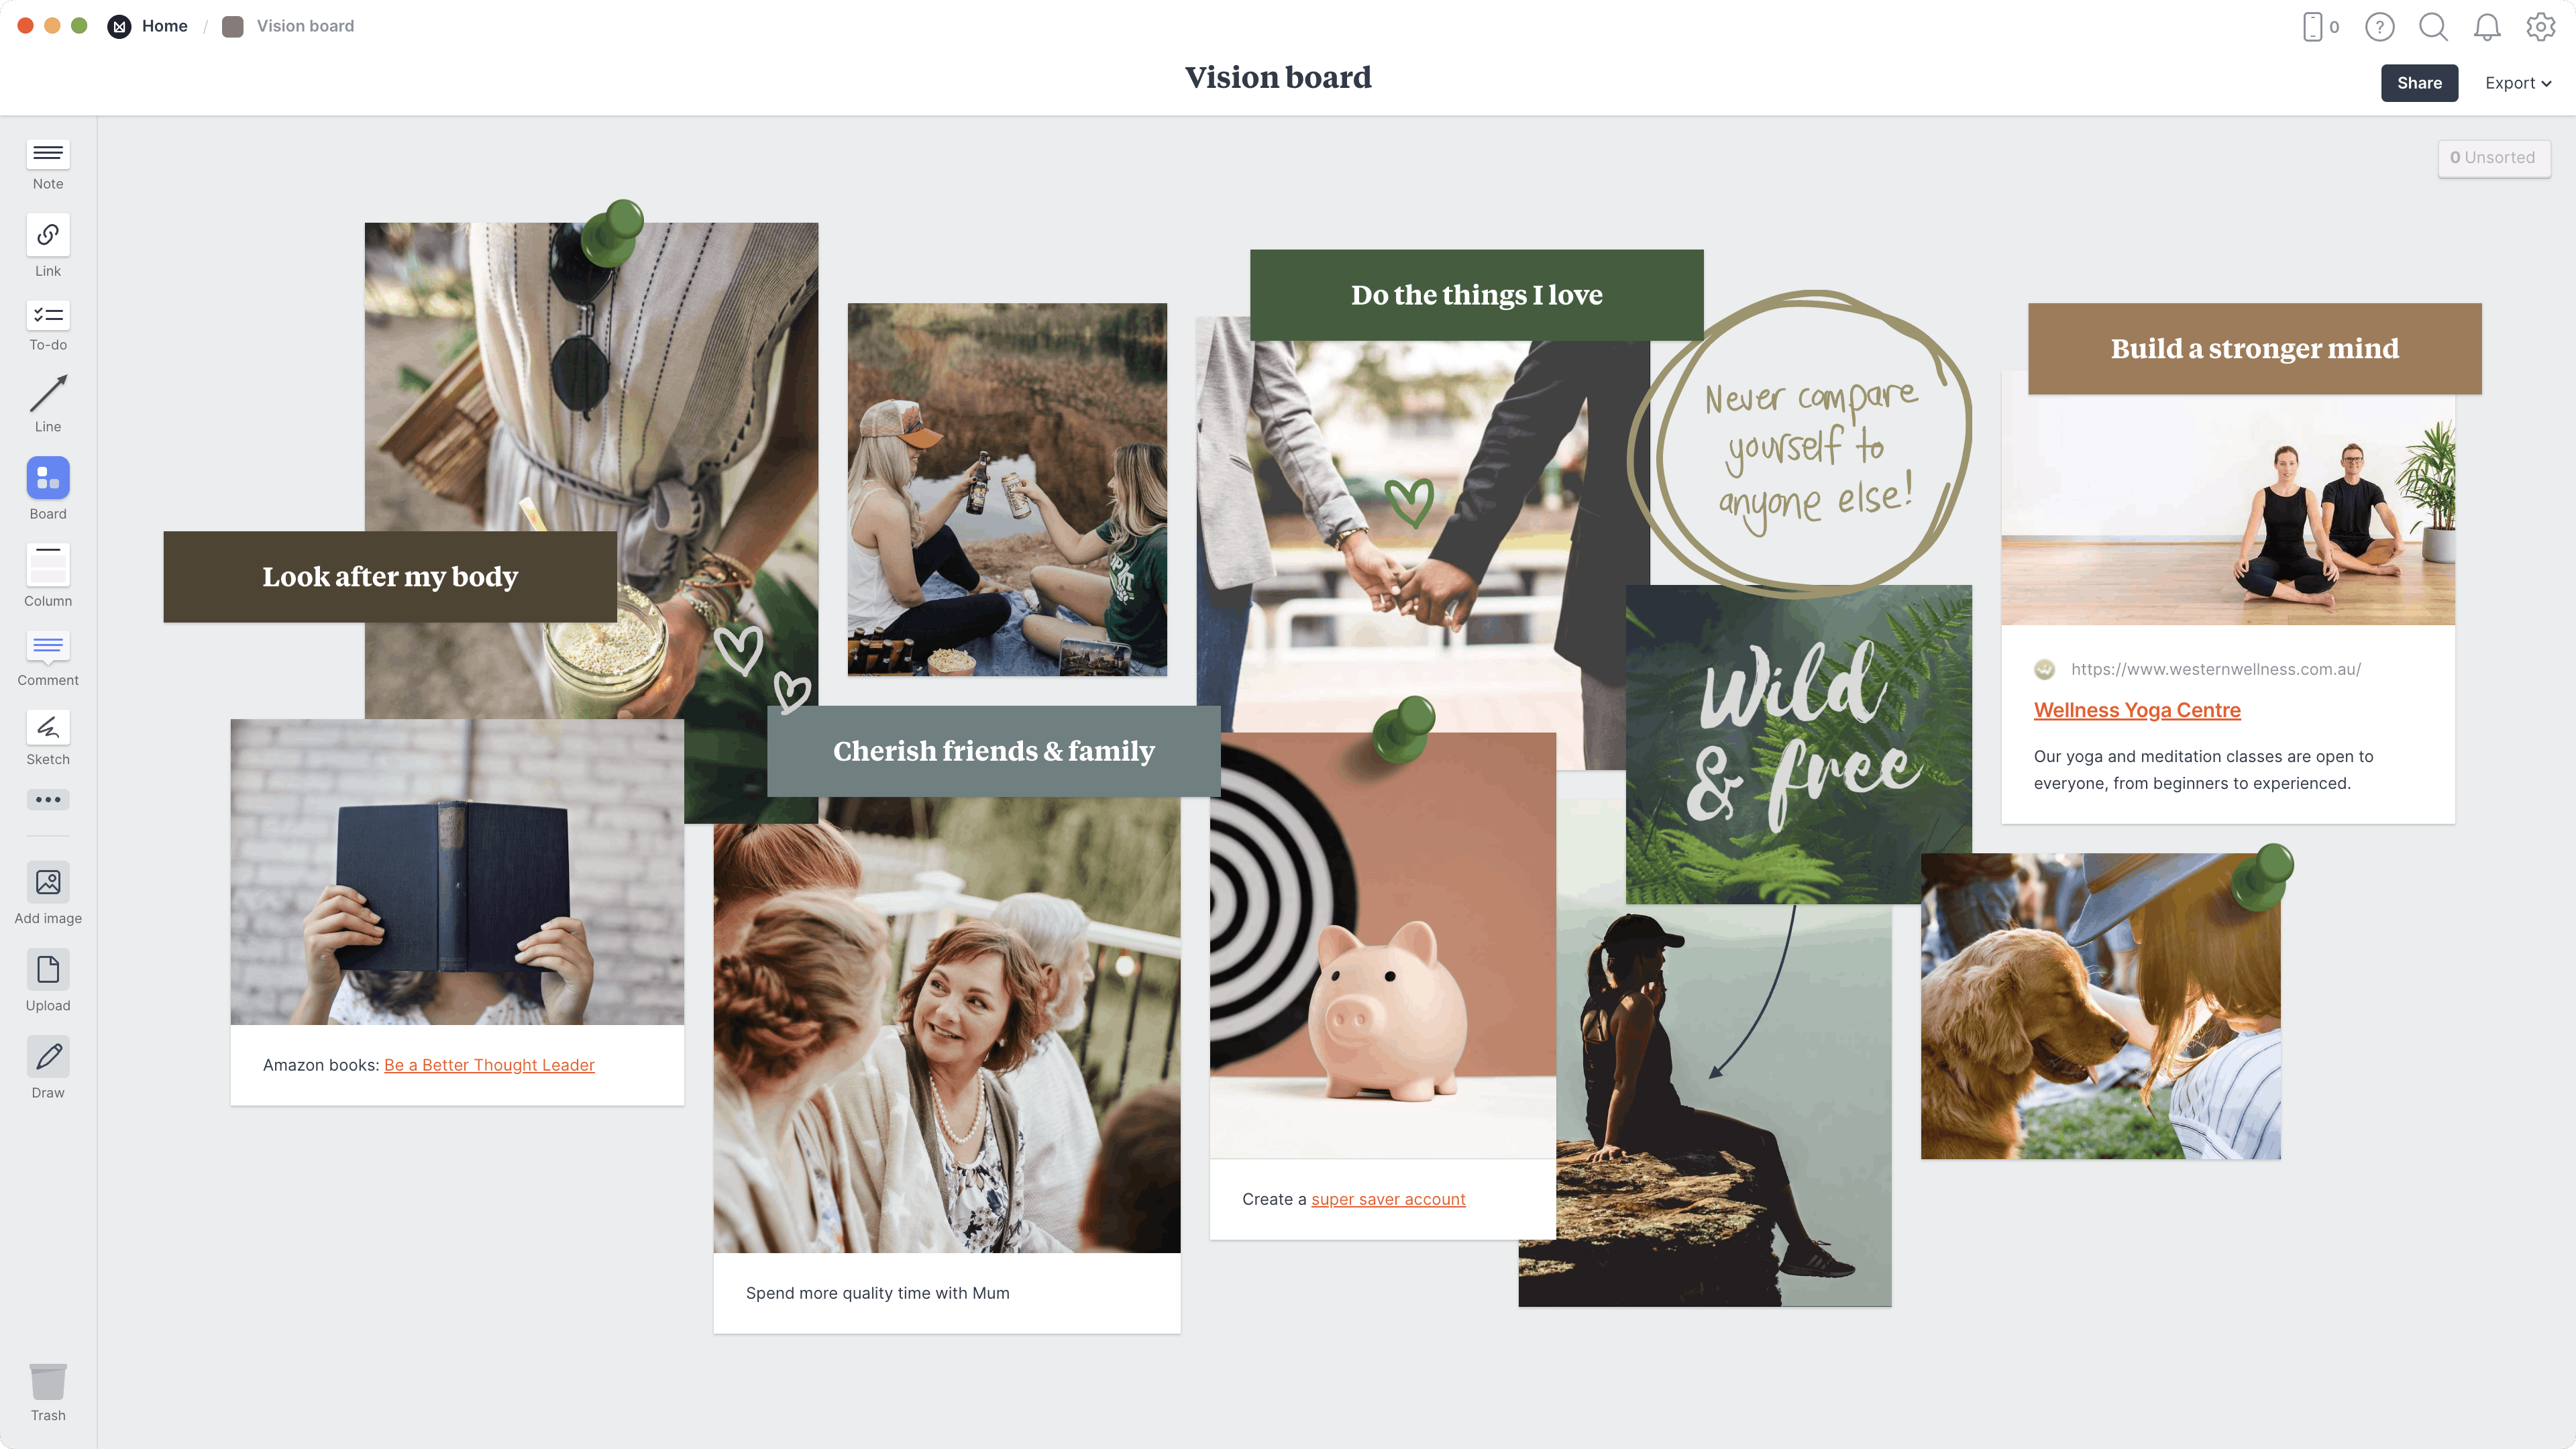 Vision Board Template, within the Milanote app